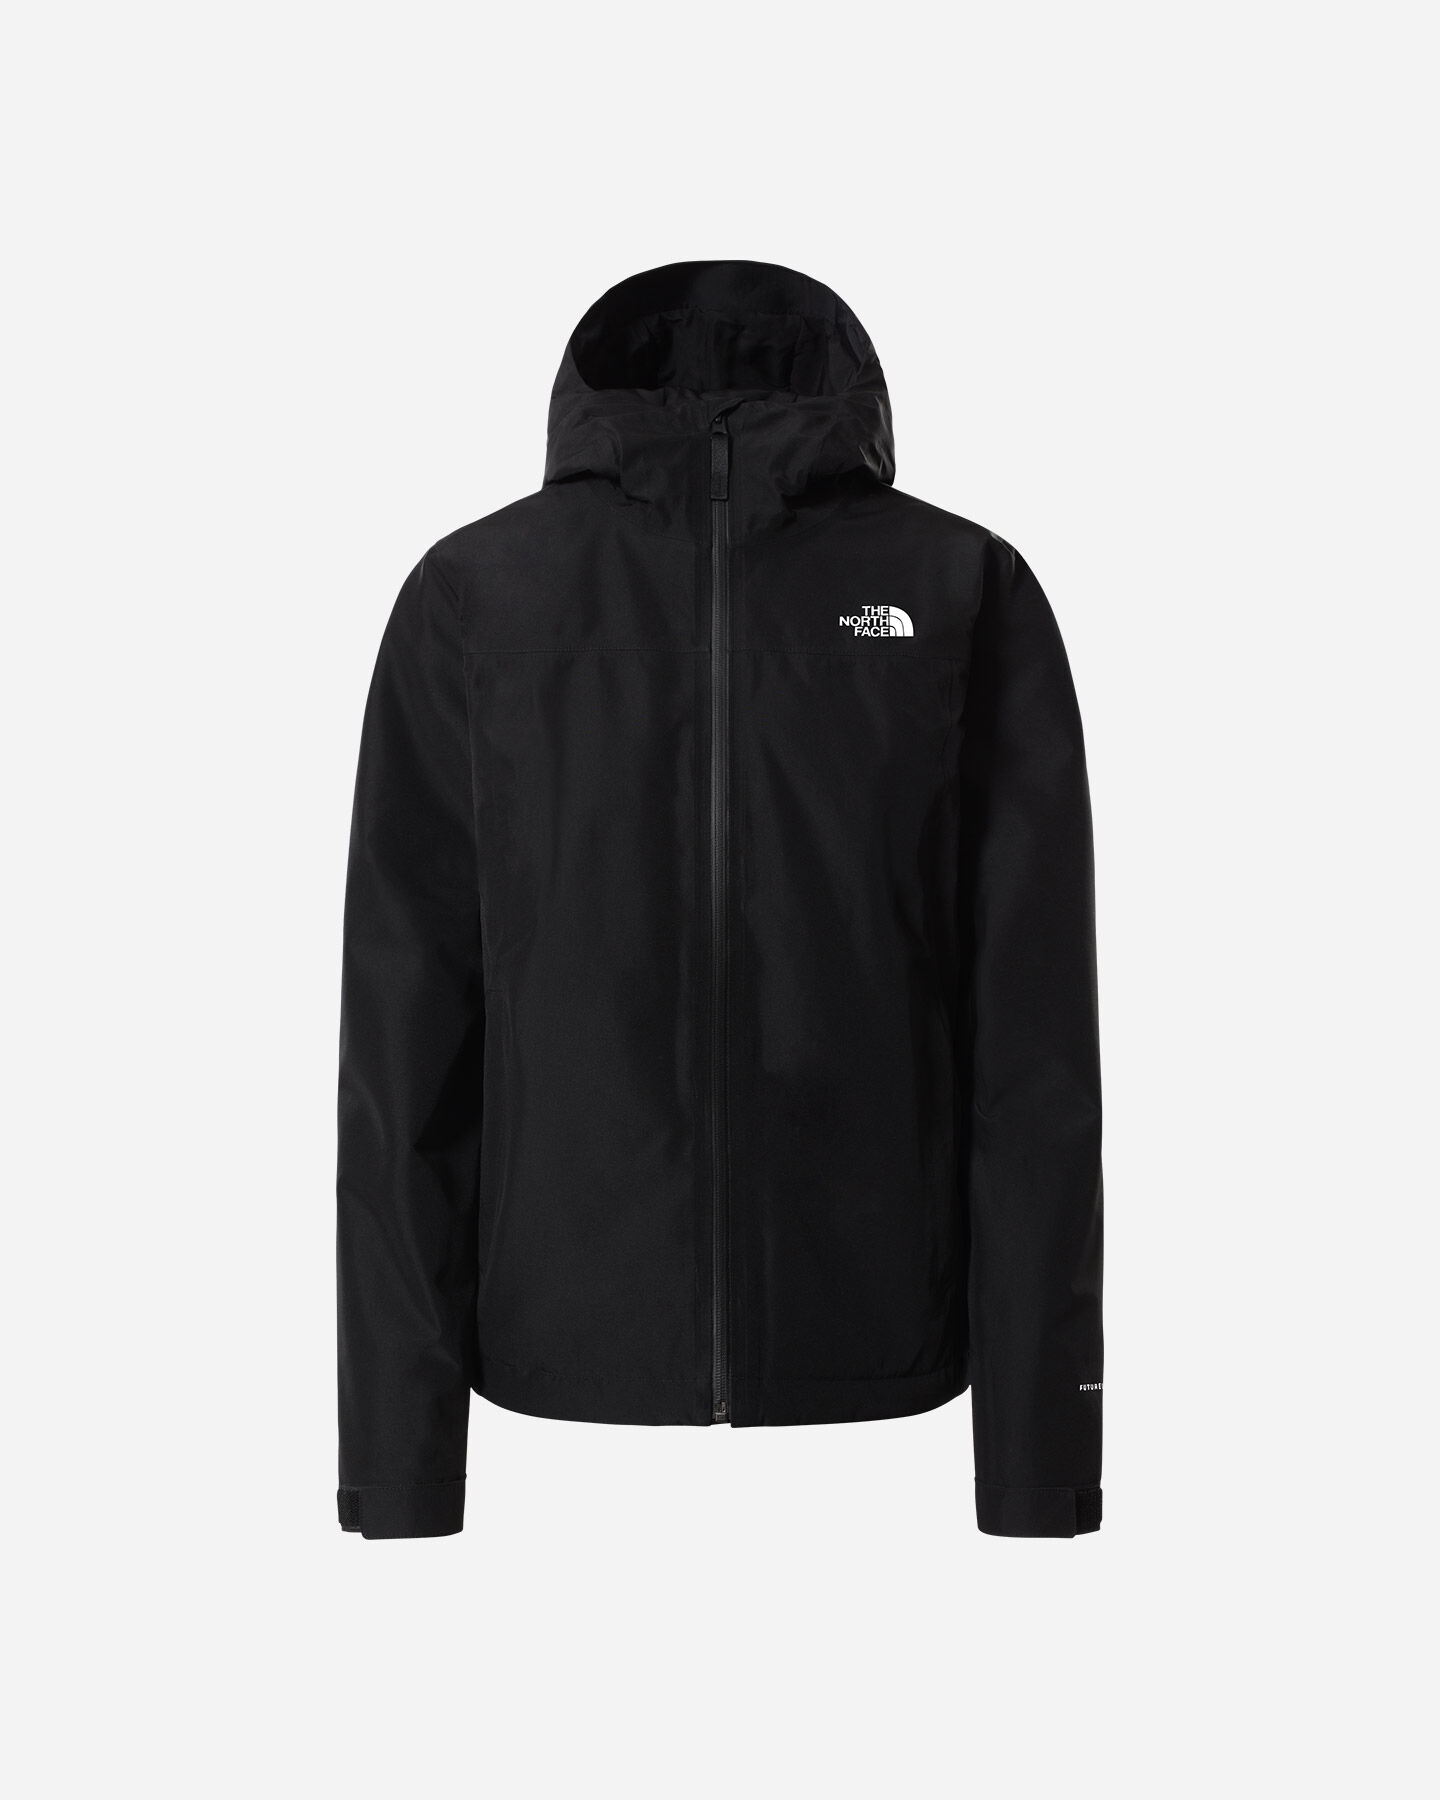  Giacca outdoor THE NORTH FACE DRYZZLE INSULATED W S5348745|JK3|XL scatto 0